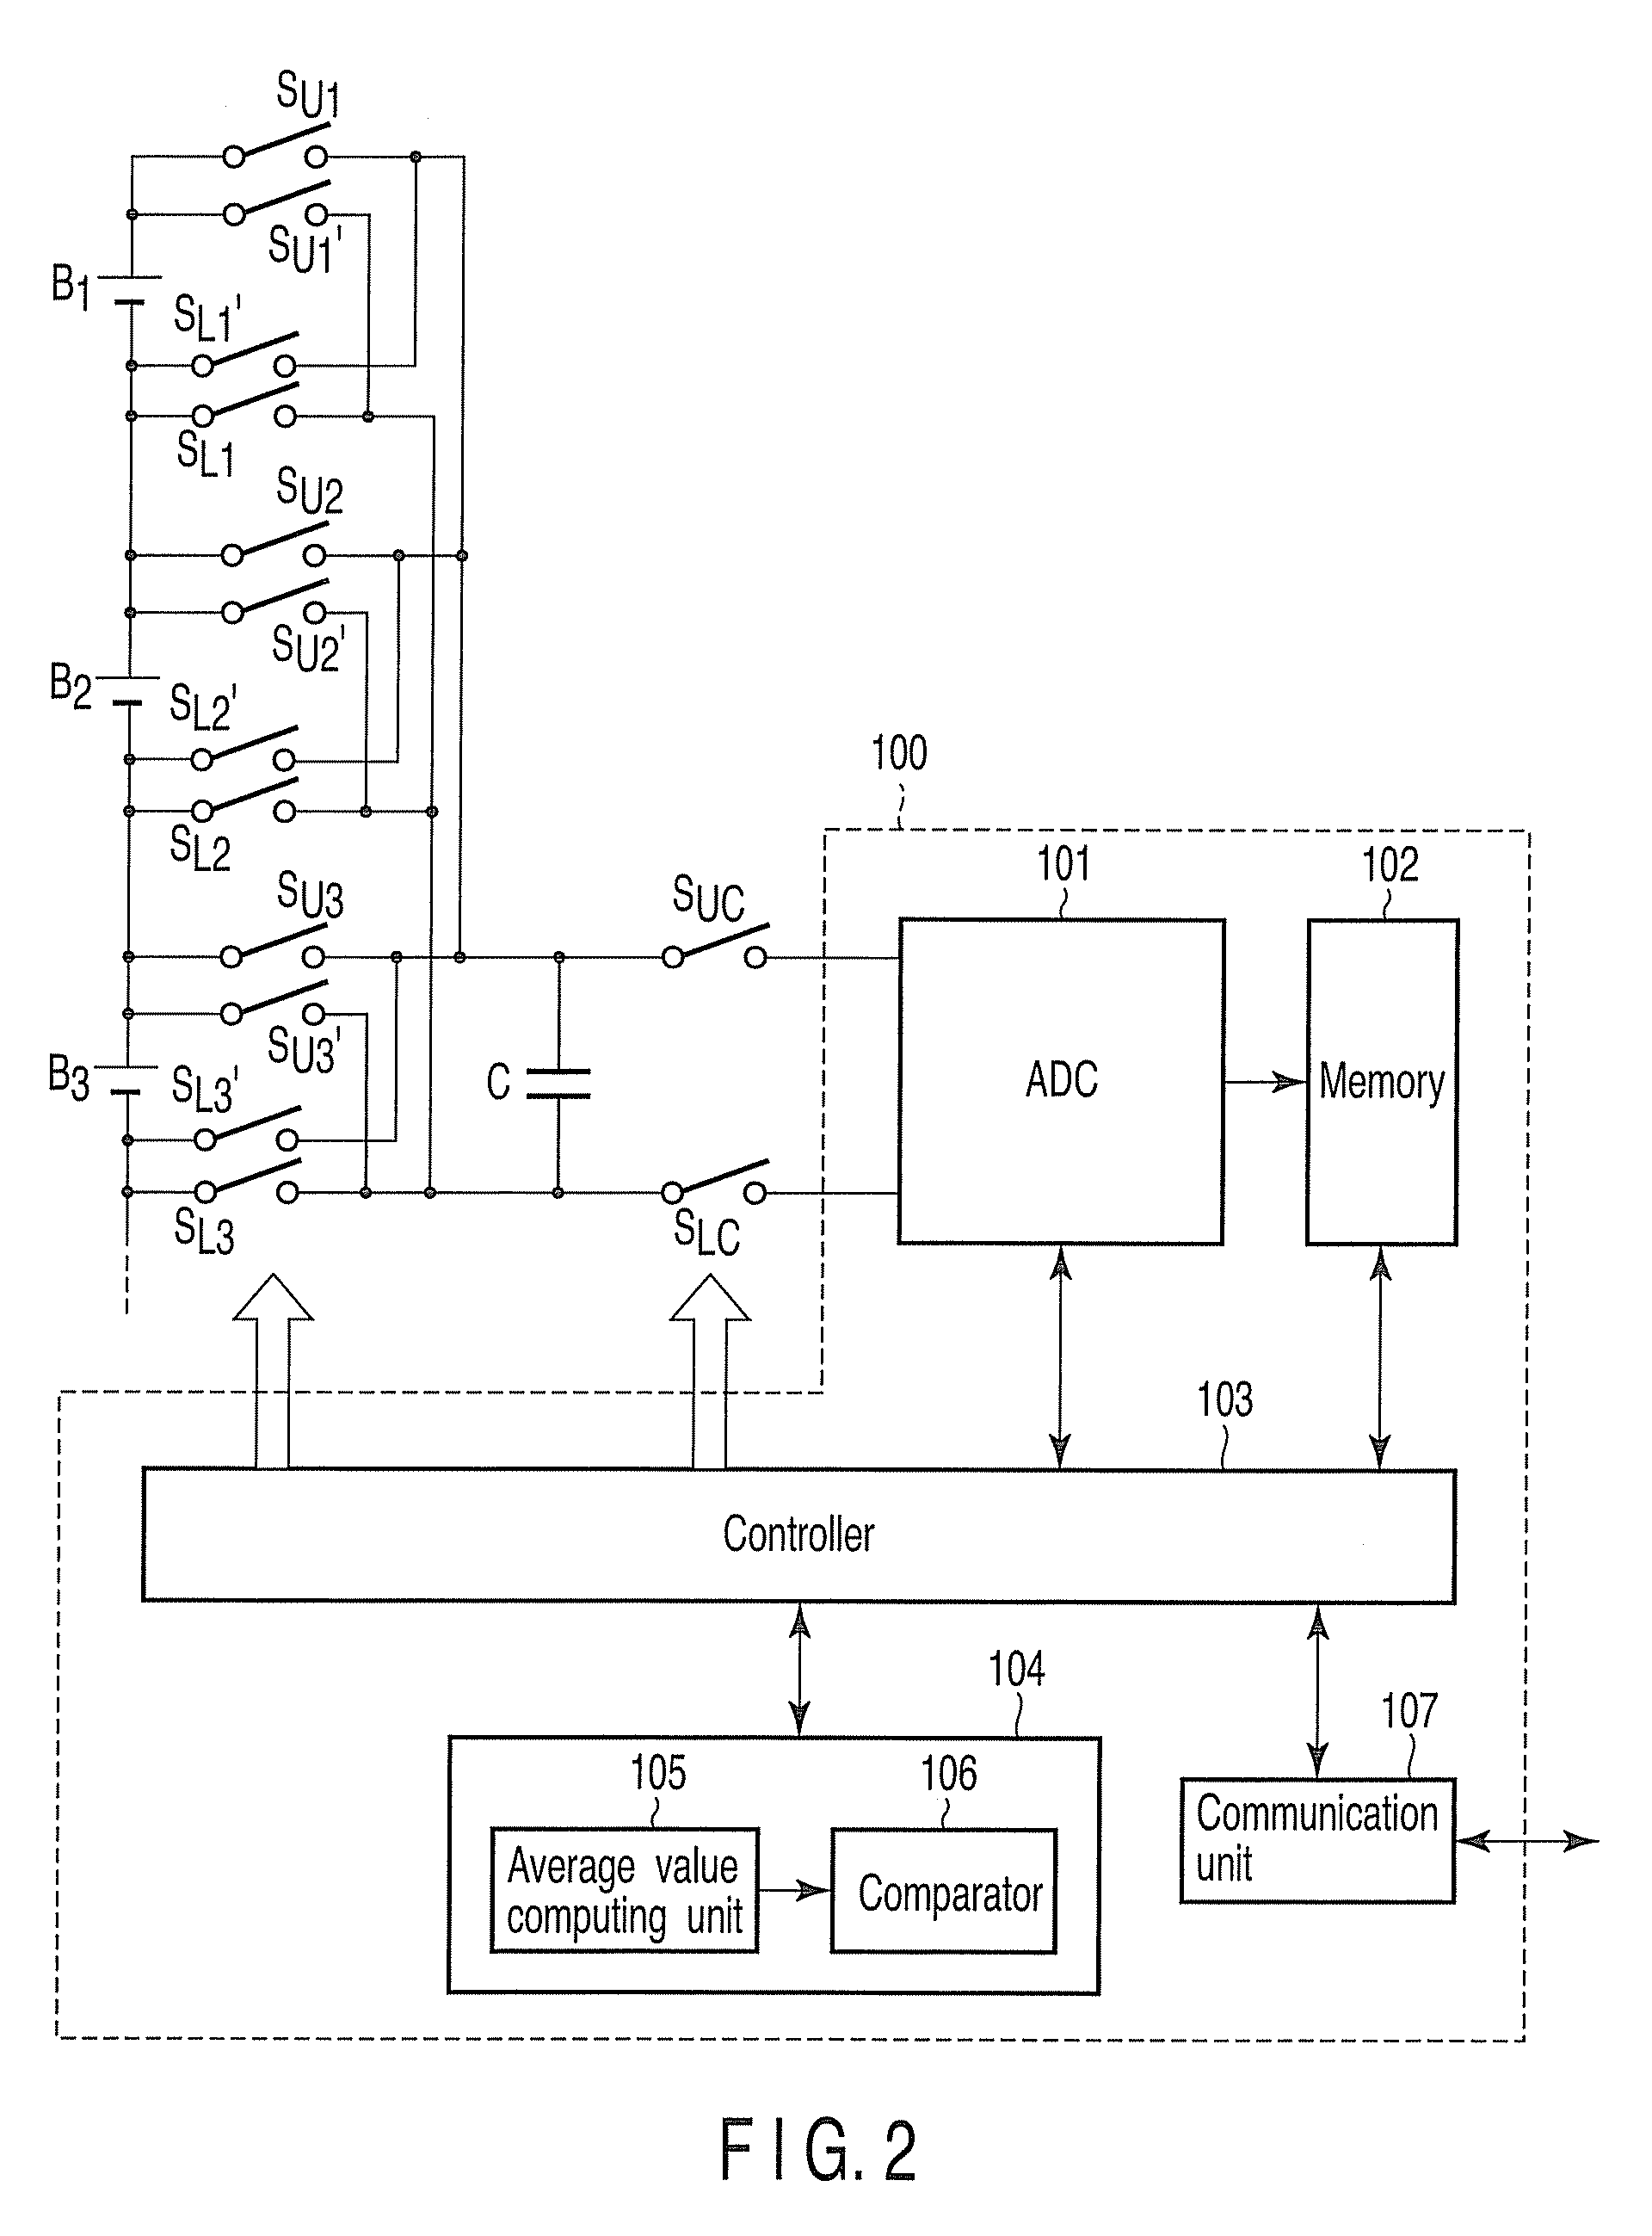 Protection device for assembled battery and assembled battery system containing the same